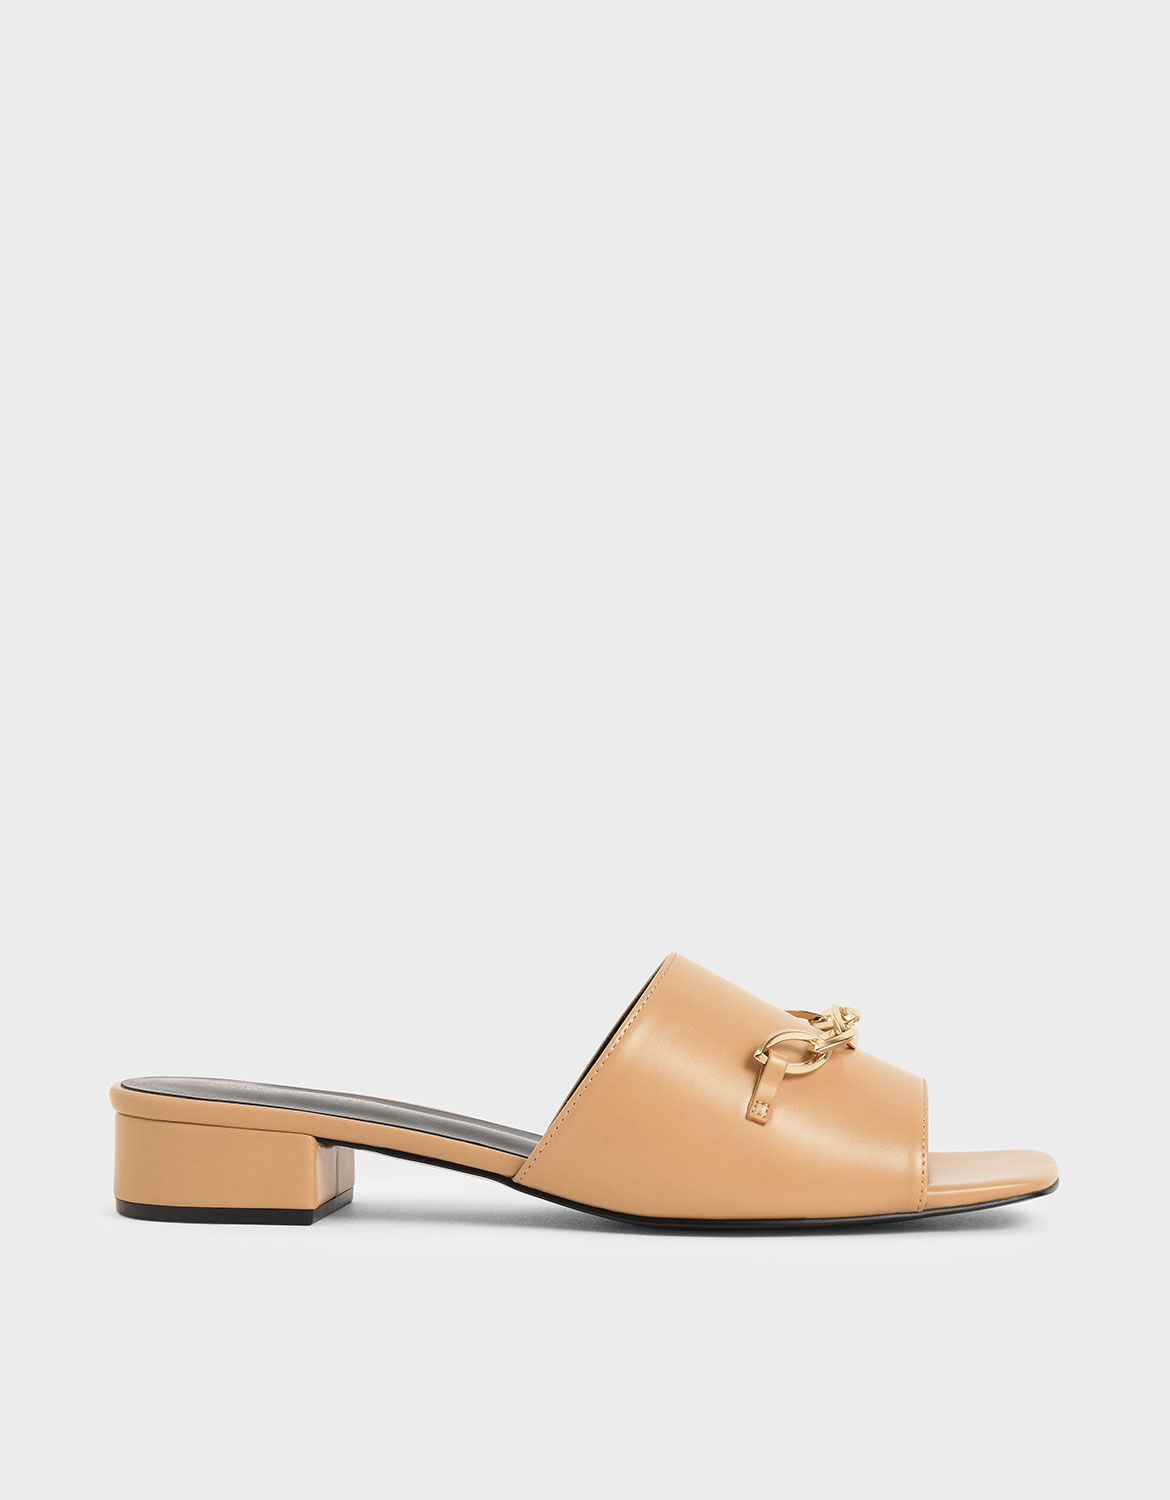 Shop Women's Mules | Exclusive Styles | CHARLES & KEITH SG